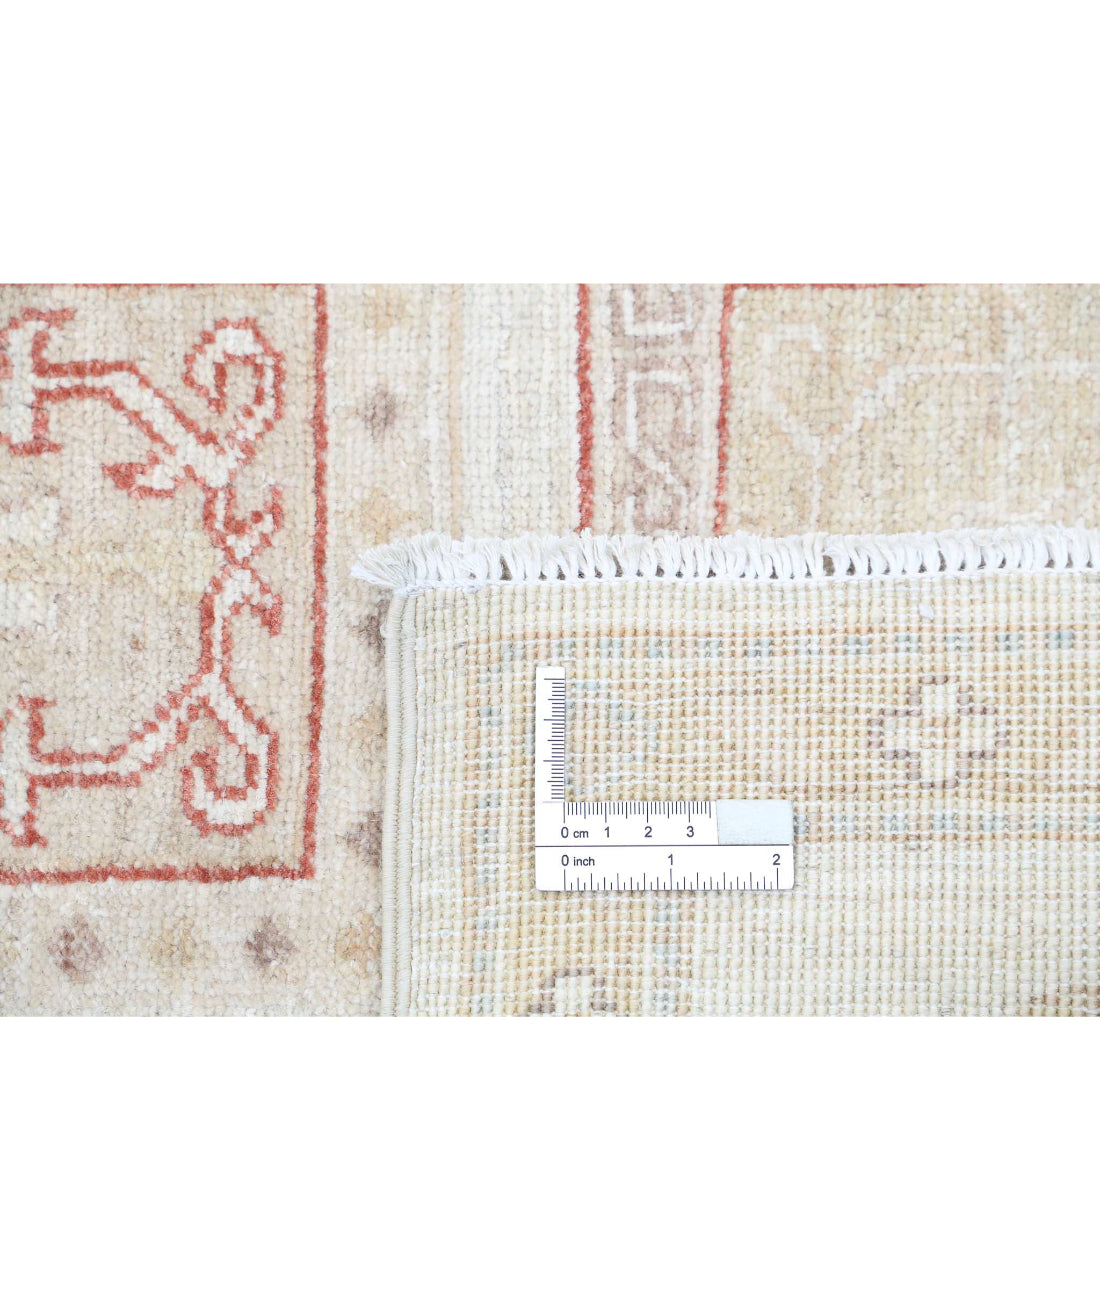 Hand Knotted Serenity Wool Rug - 5'6'' x 7'11'' 5'6'' x 7'11'' (165 X 238) / Ivory / Red